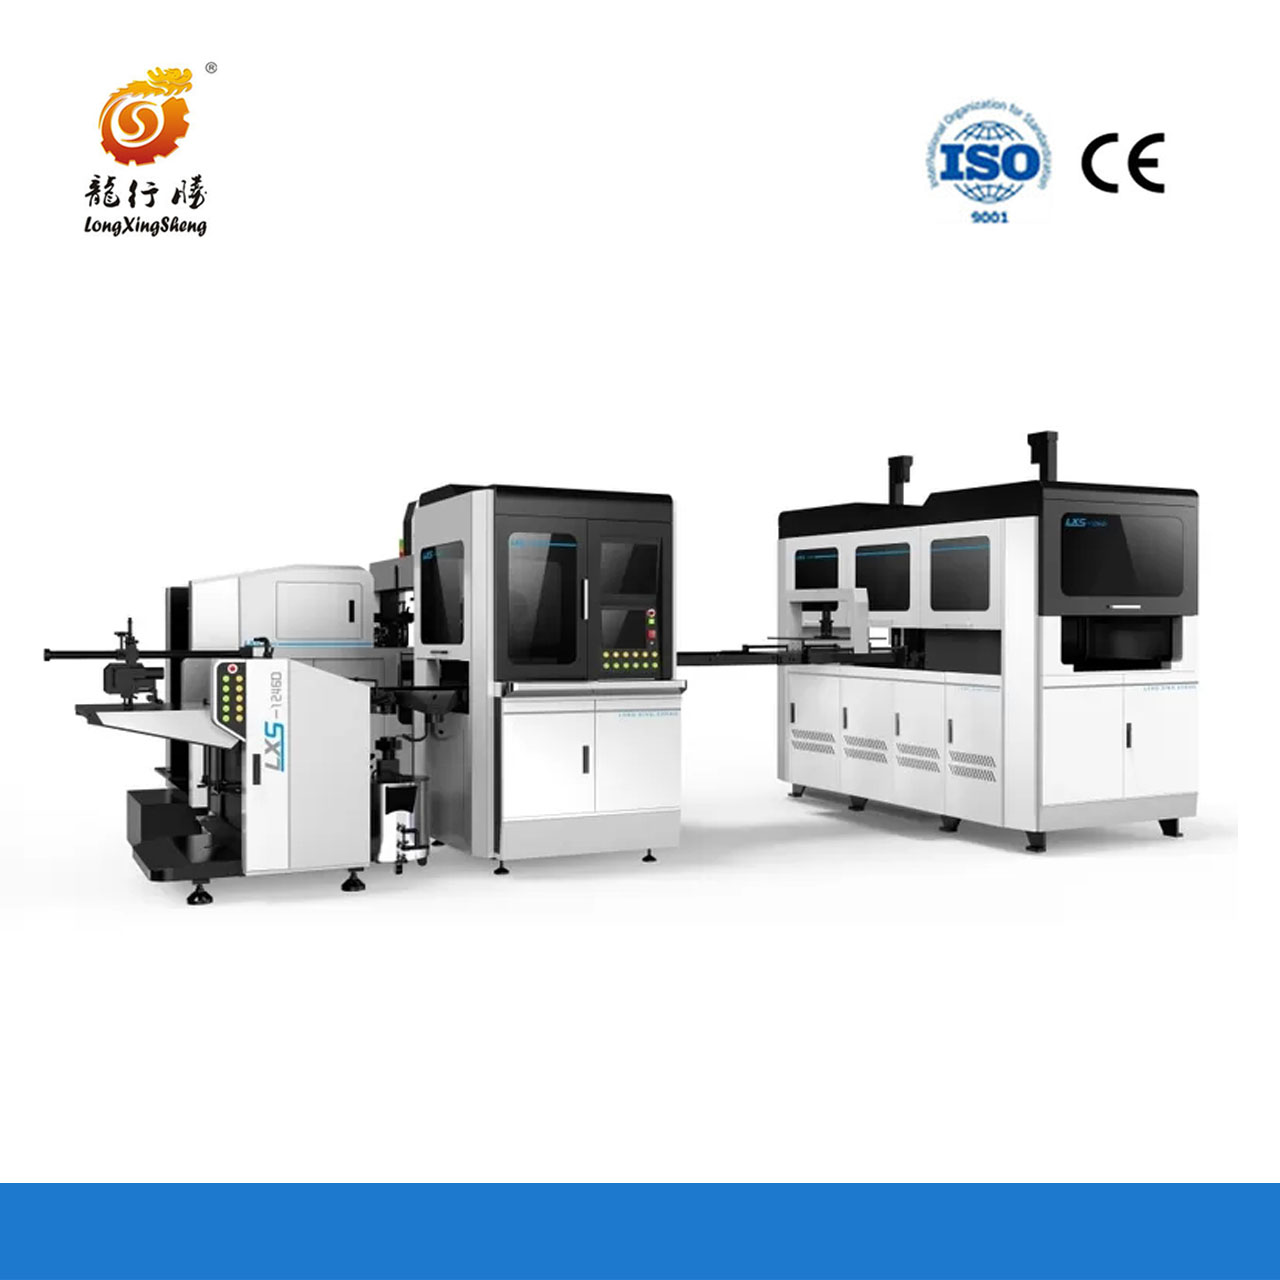  Fully Automatic Intelligent Double Station Rigid Box Forming Machine